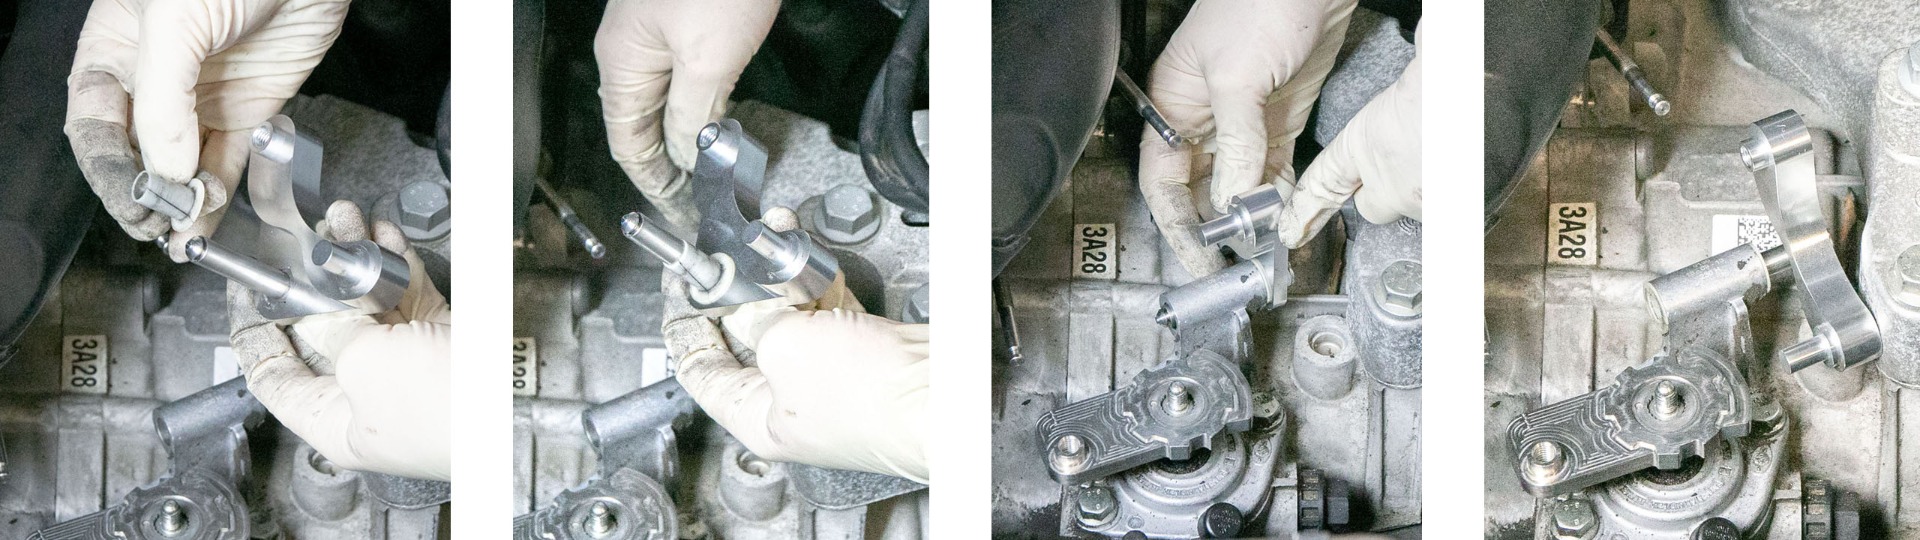 Installing DAP "Holy Shift" Side to Side Selector for 6 Speed Short Shifter Install